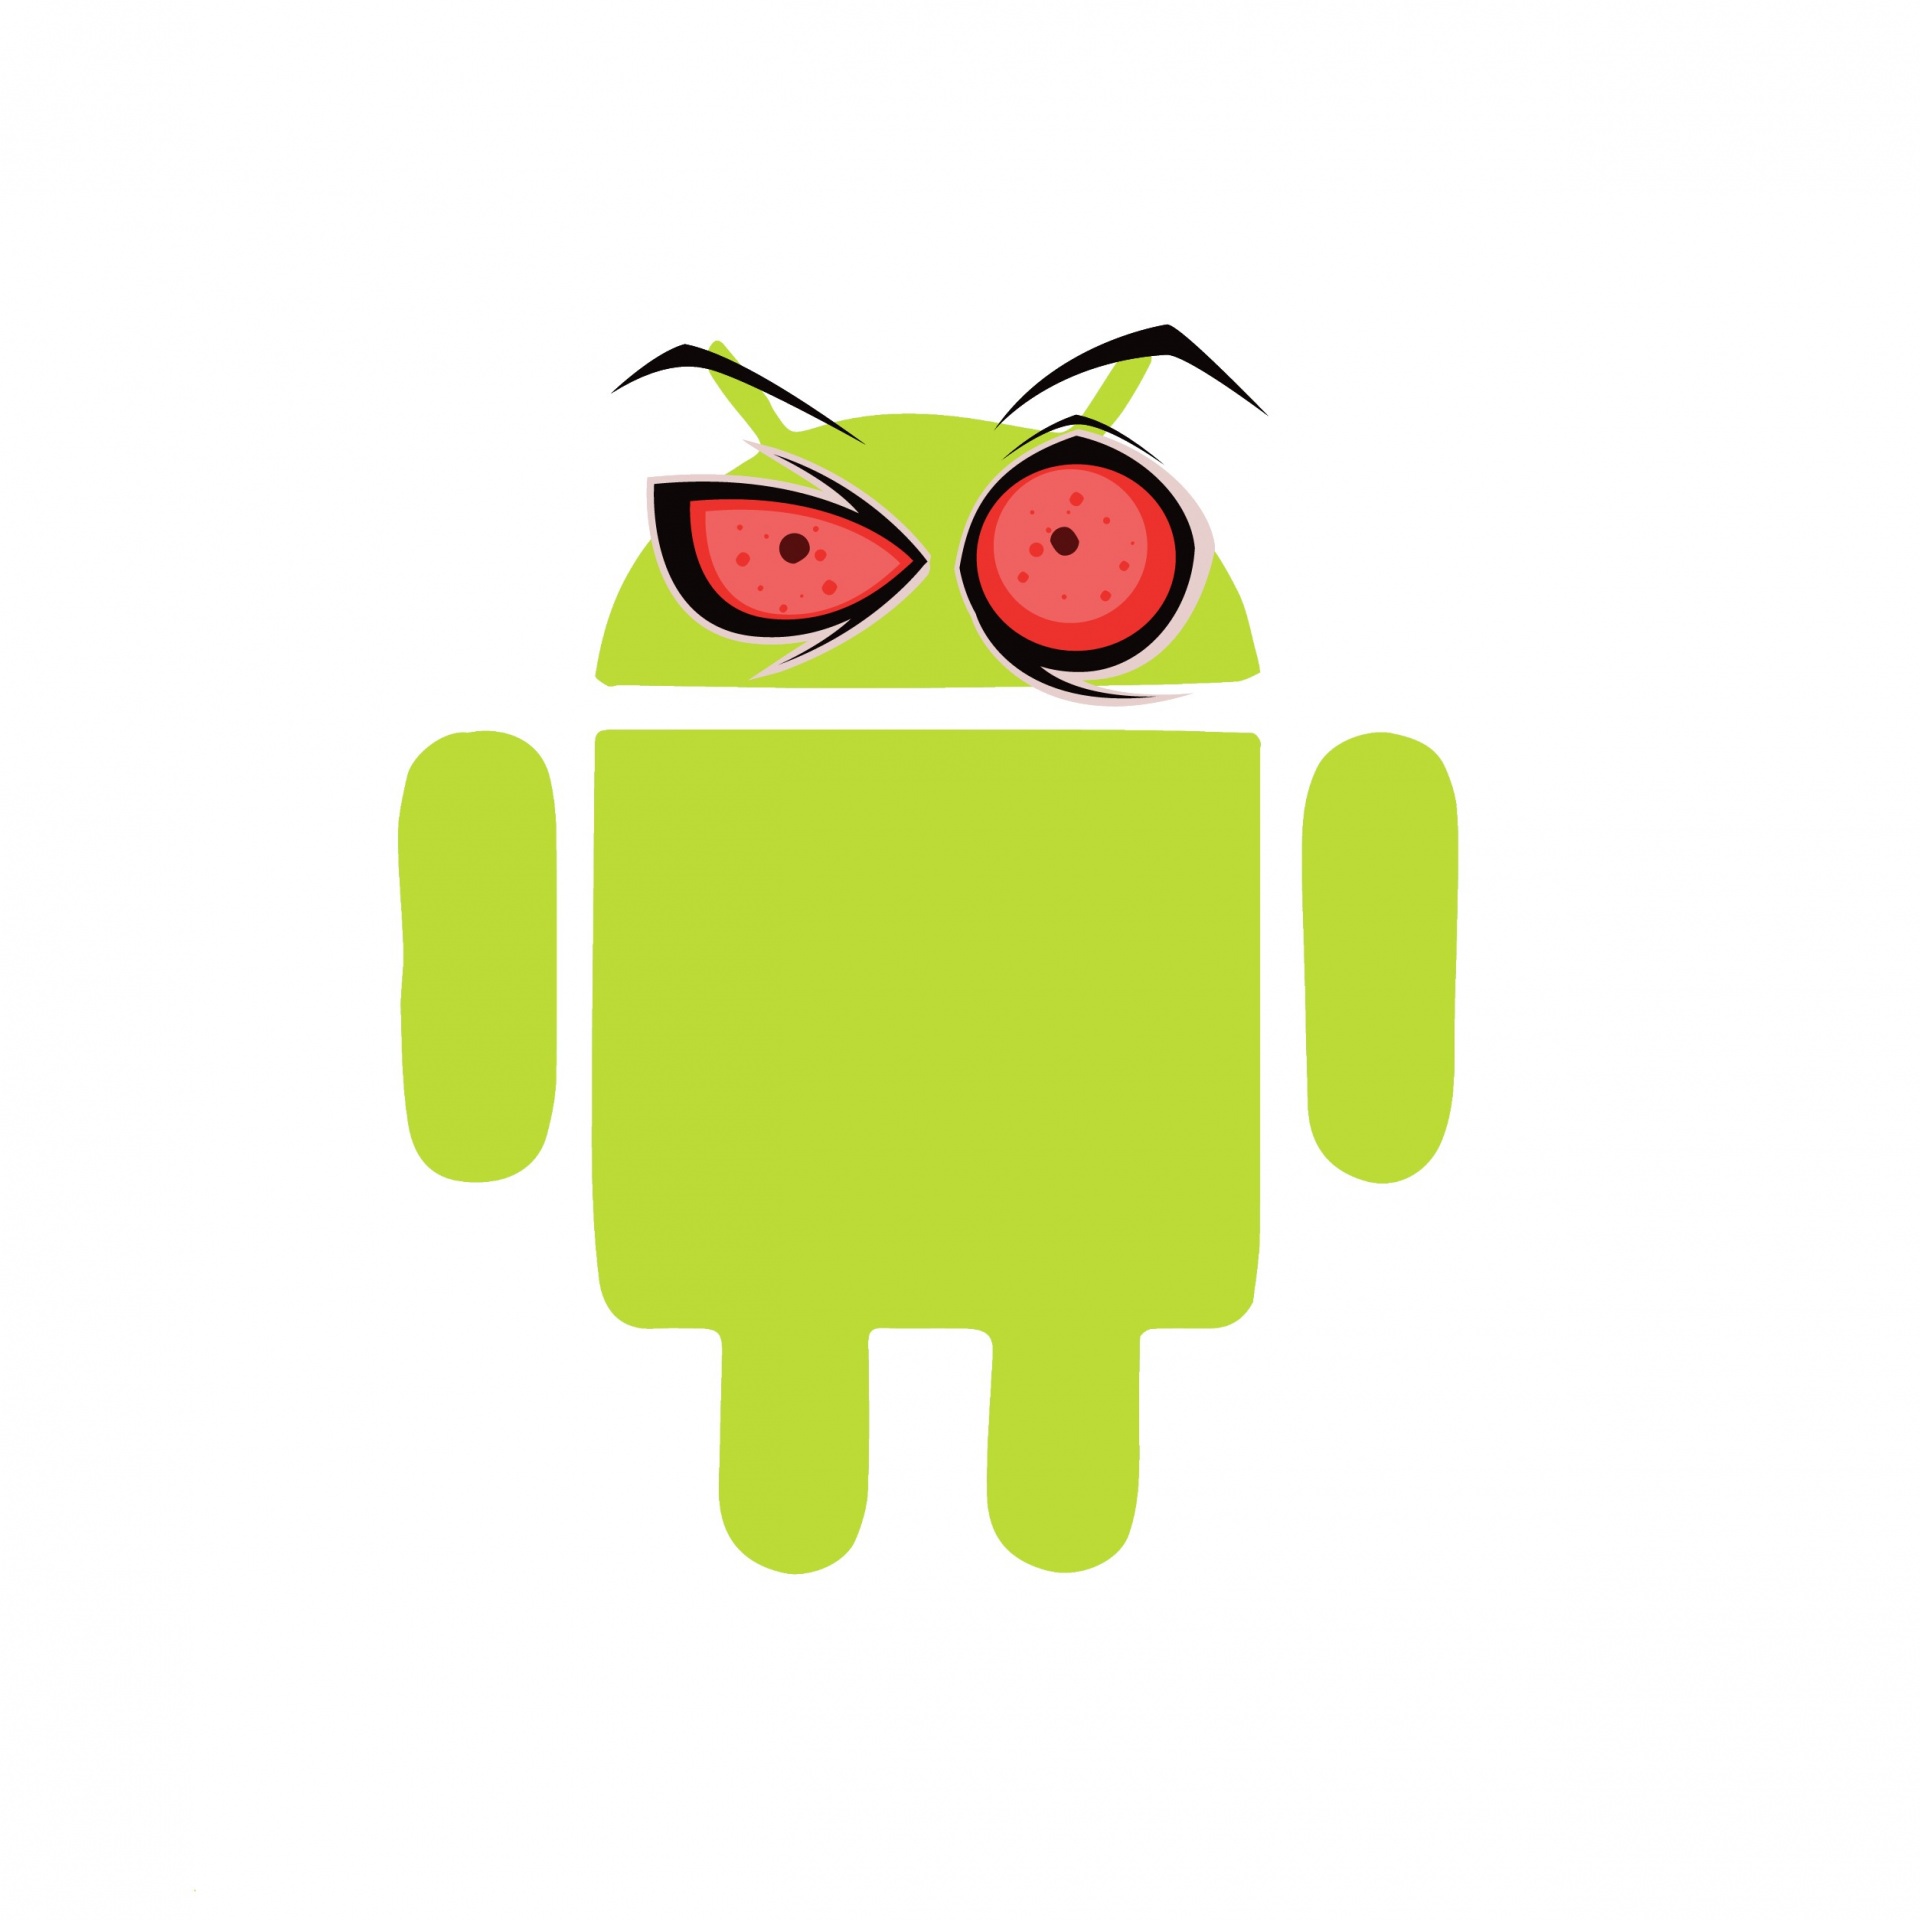 Android, operating system, emotions, emoji, angry